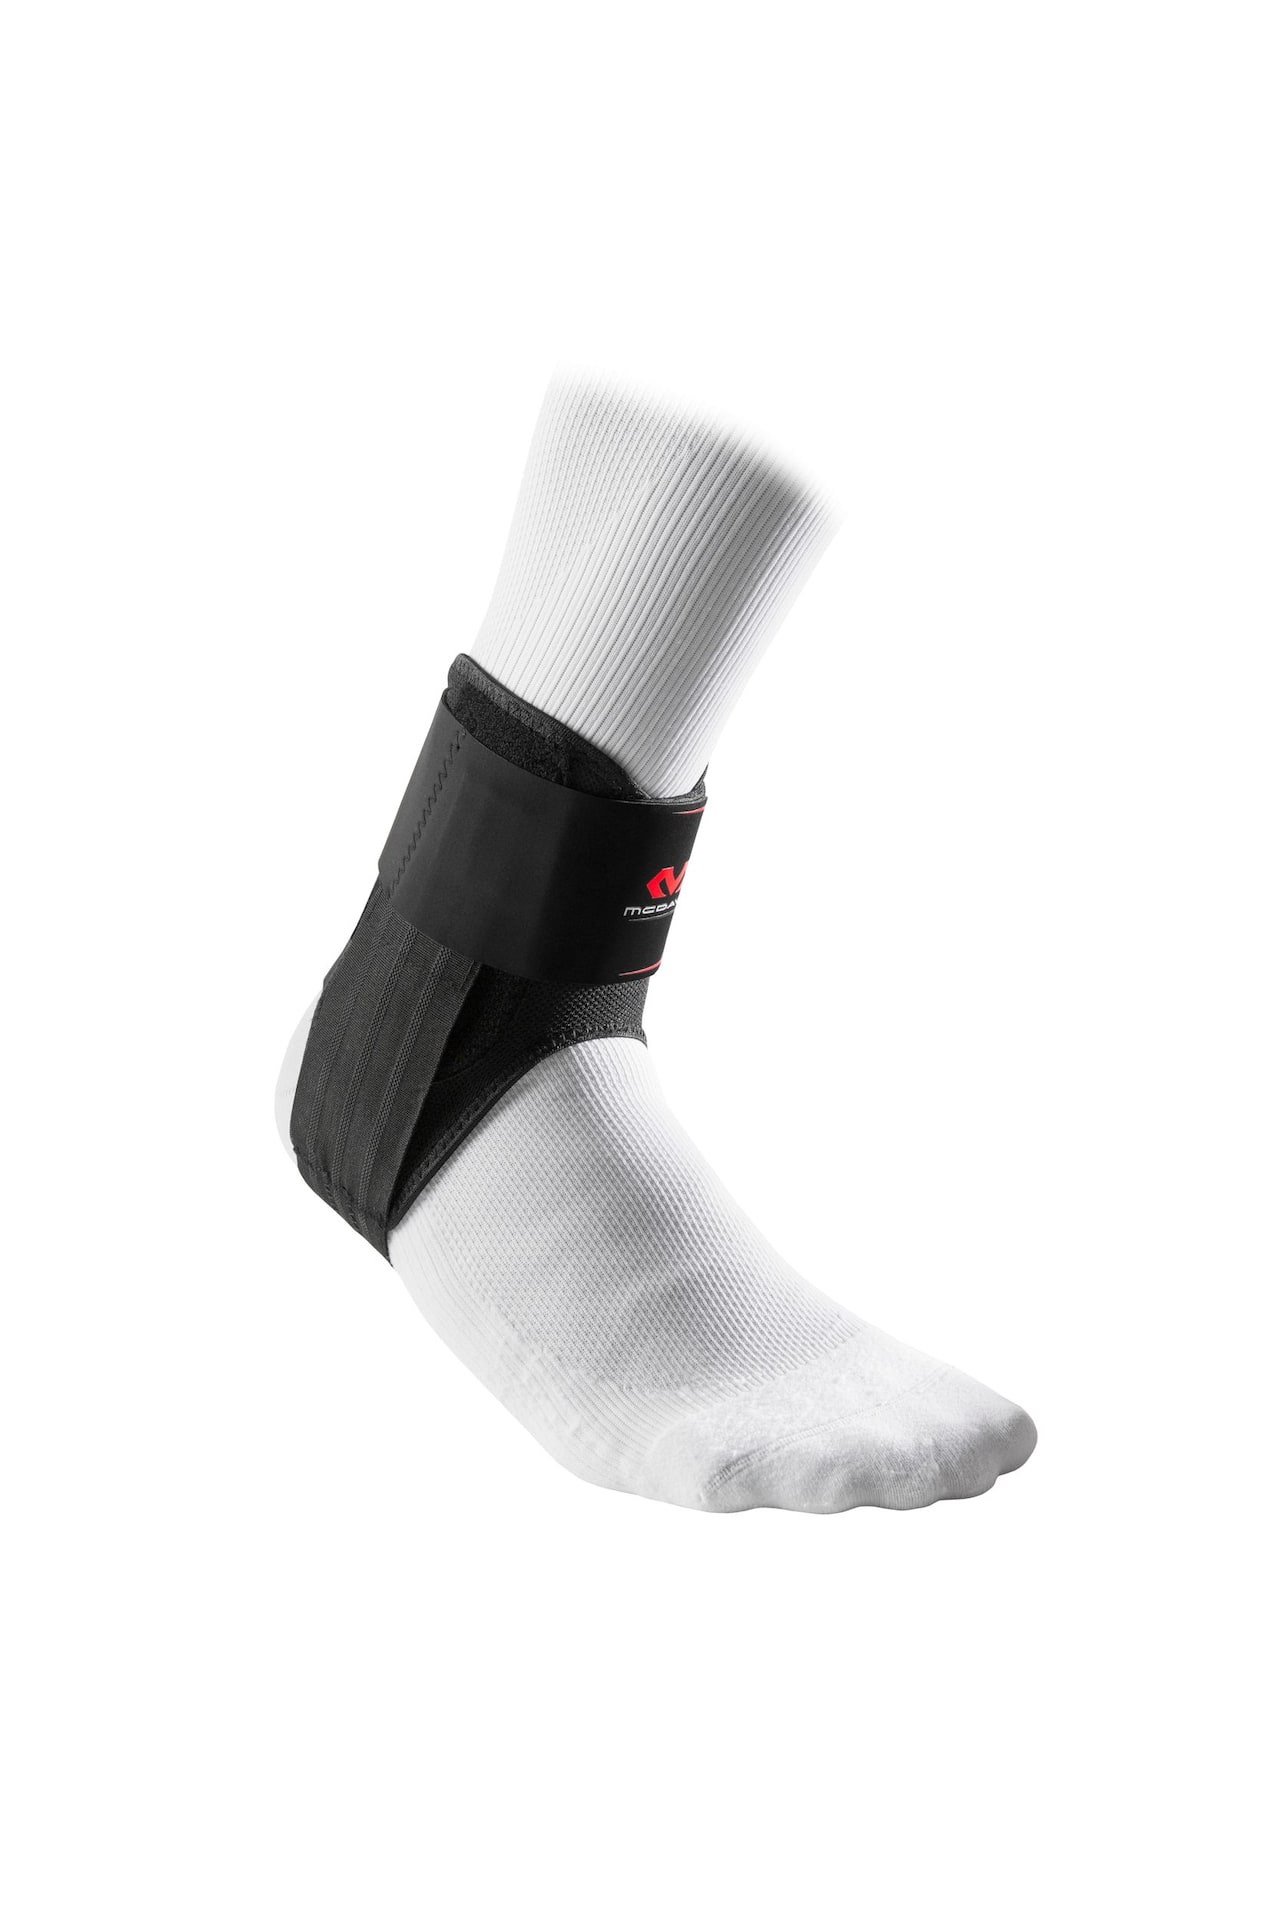 McDavid Pair Compression Calf Sleeves, Braces & Supports -  Canada